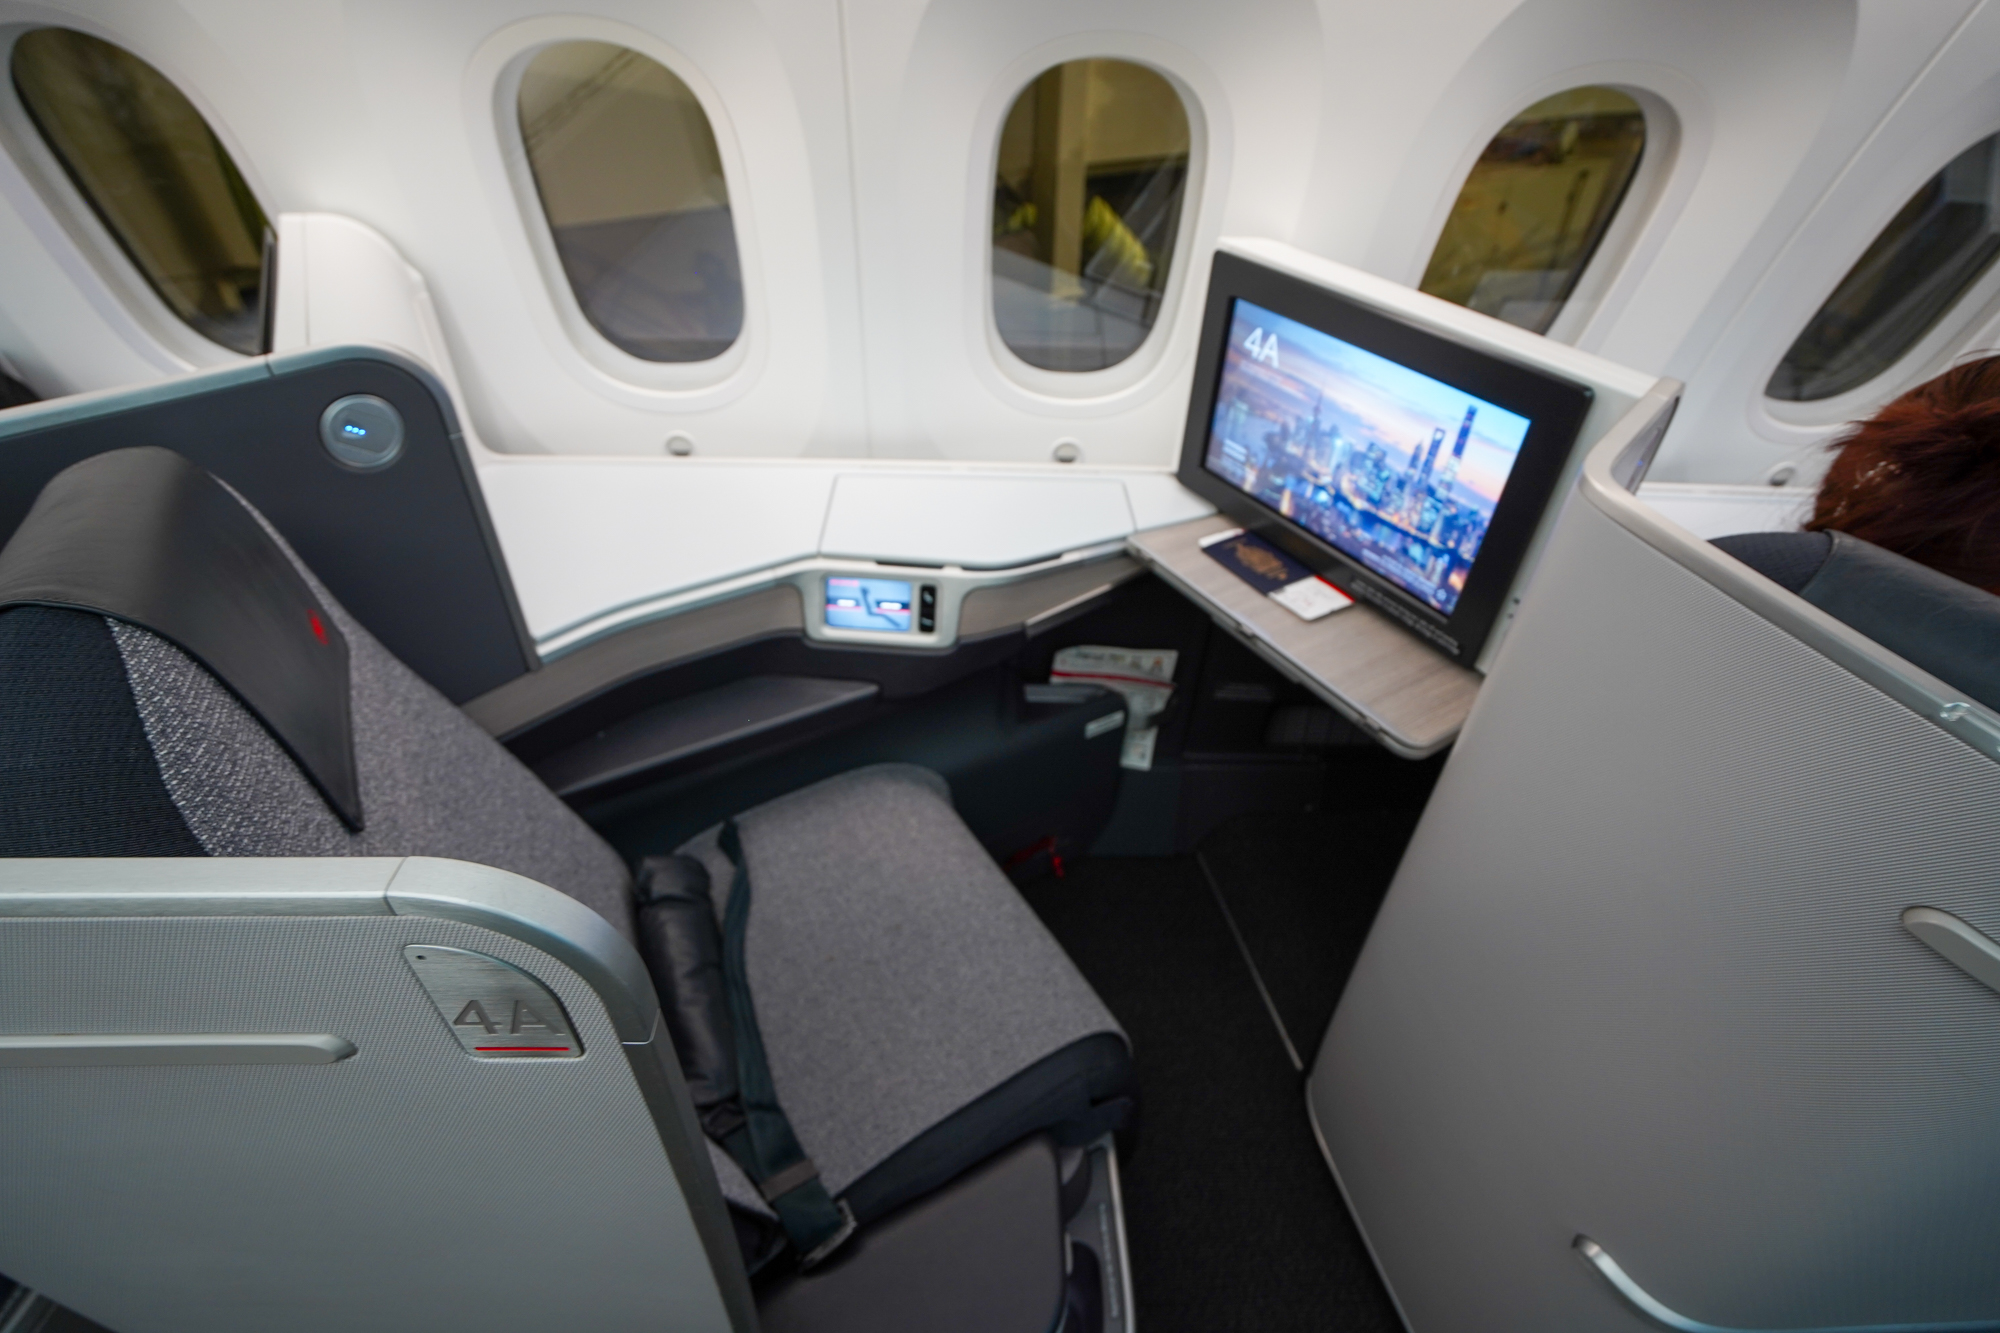 Air Canada eUpgrades: When Things Don’t Go Your Way